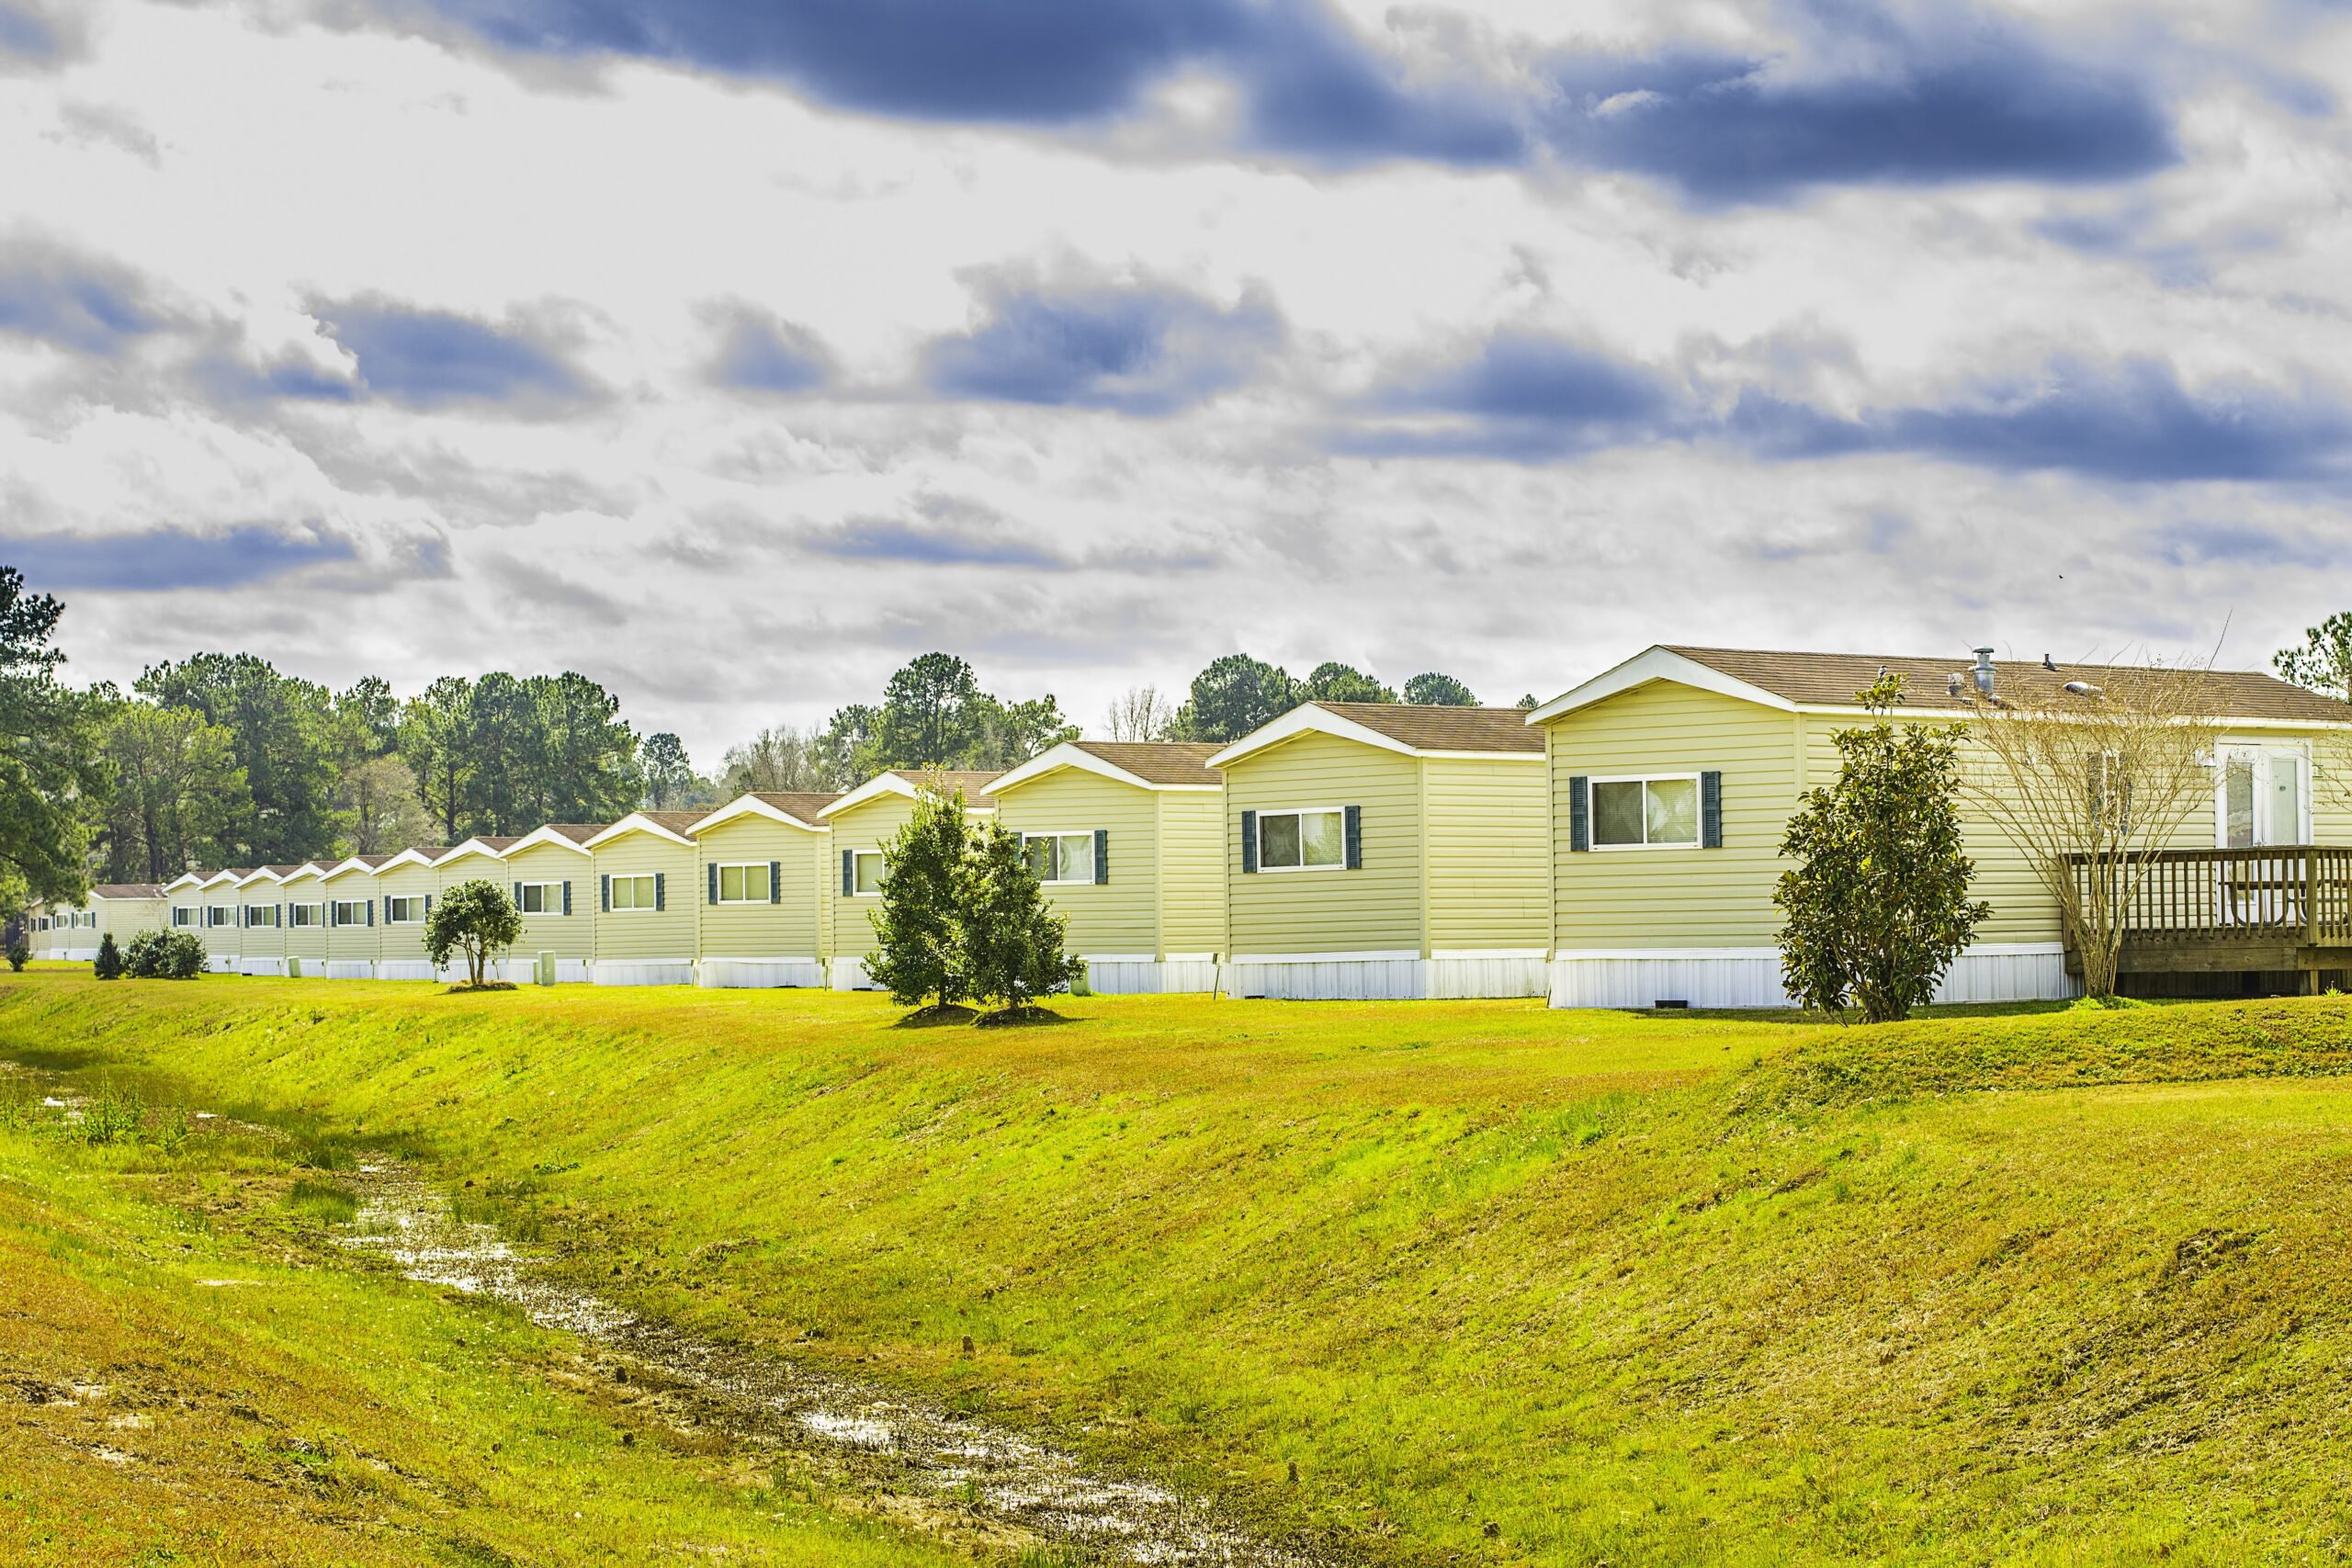 How To Become An Oklahoma Manufactured Home Manufacturer